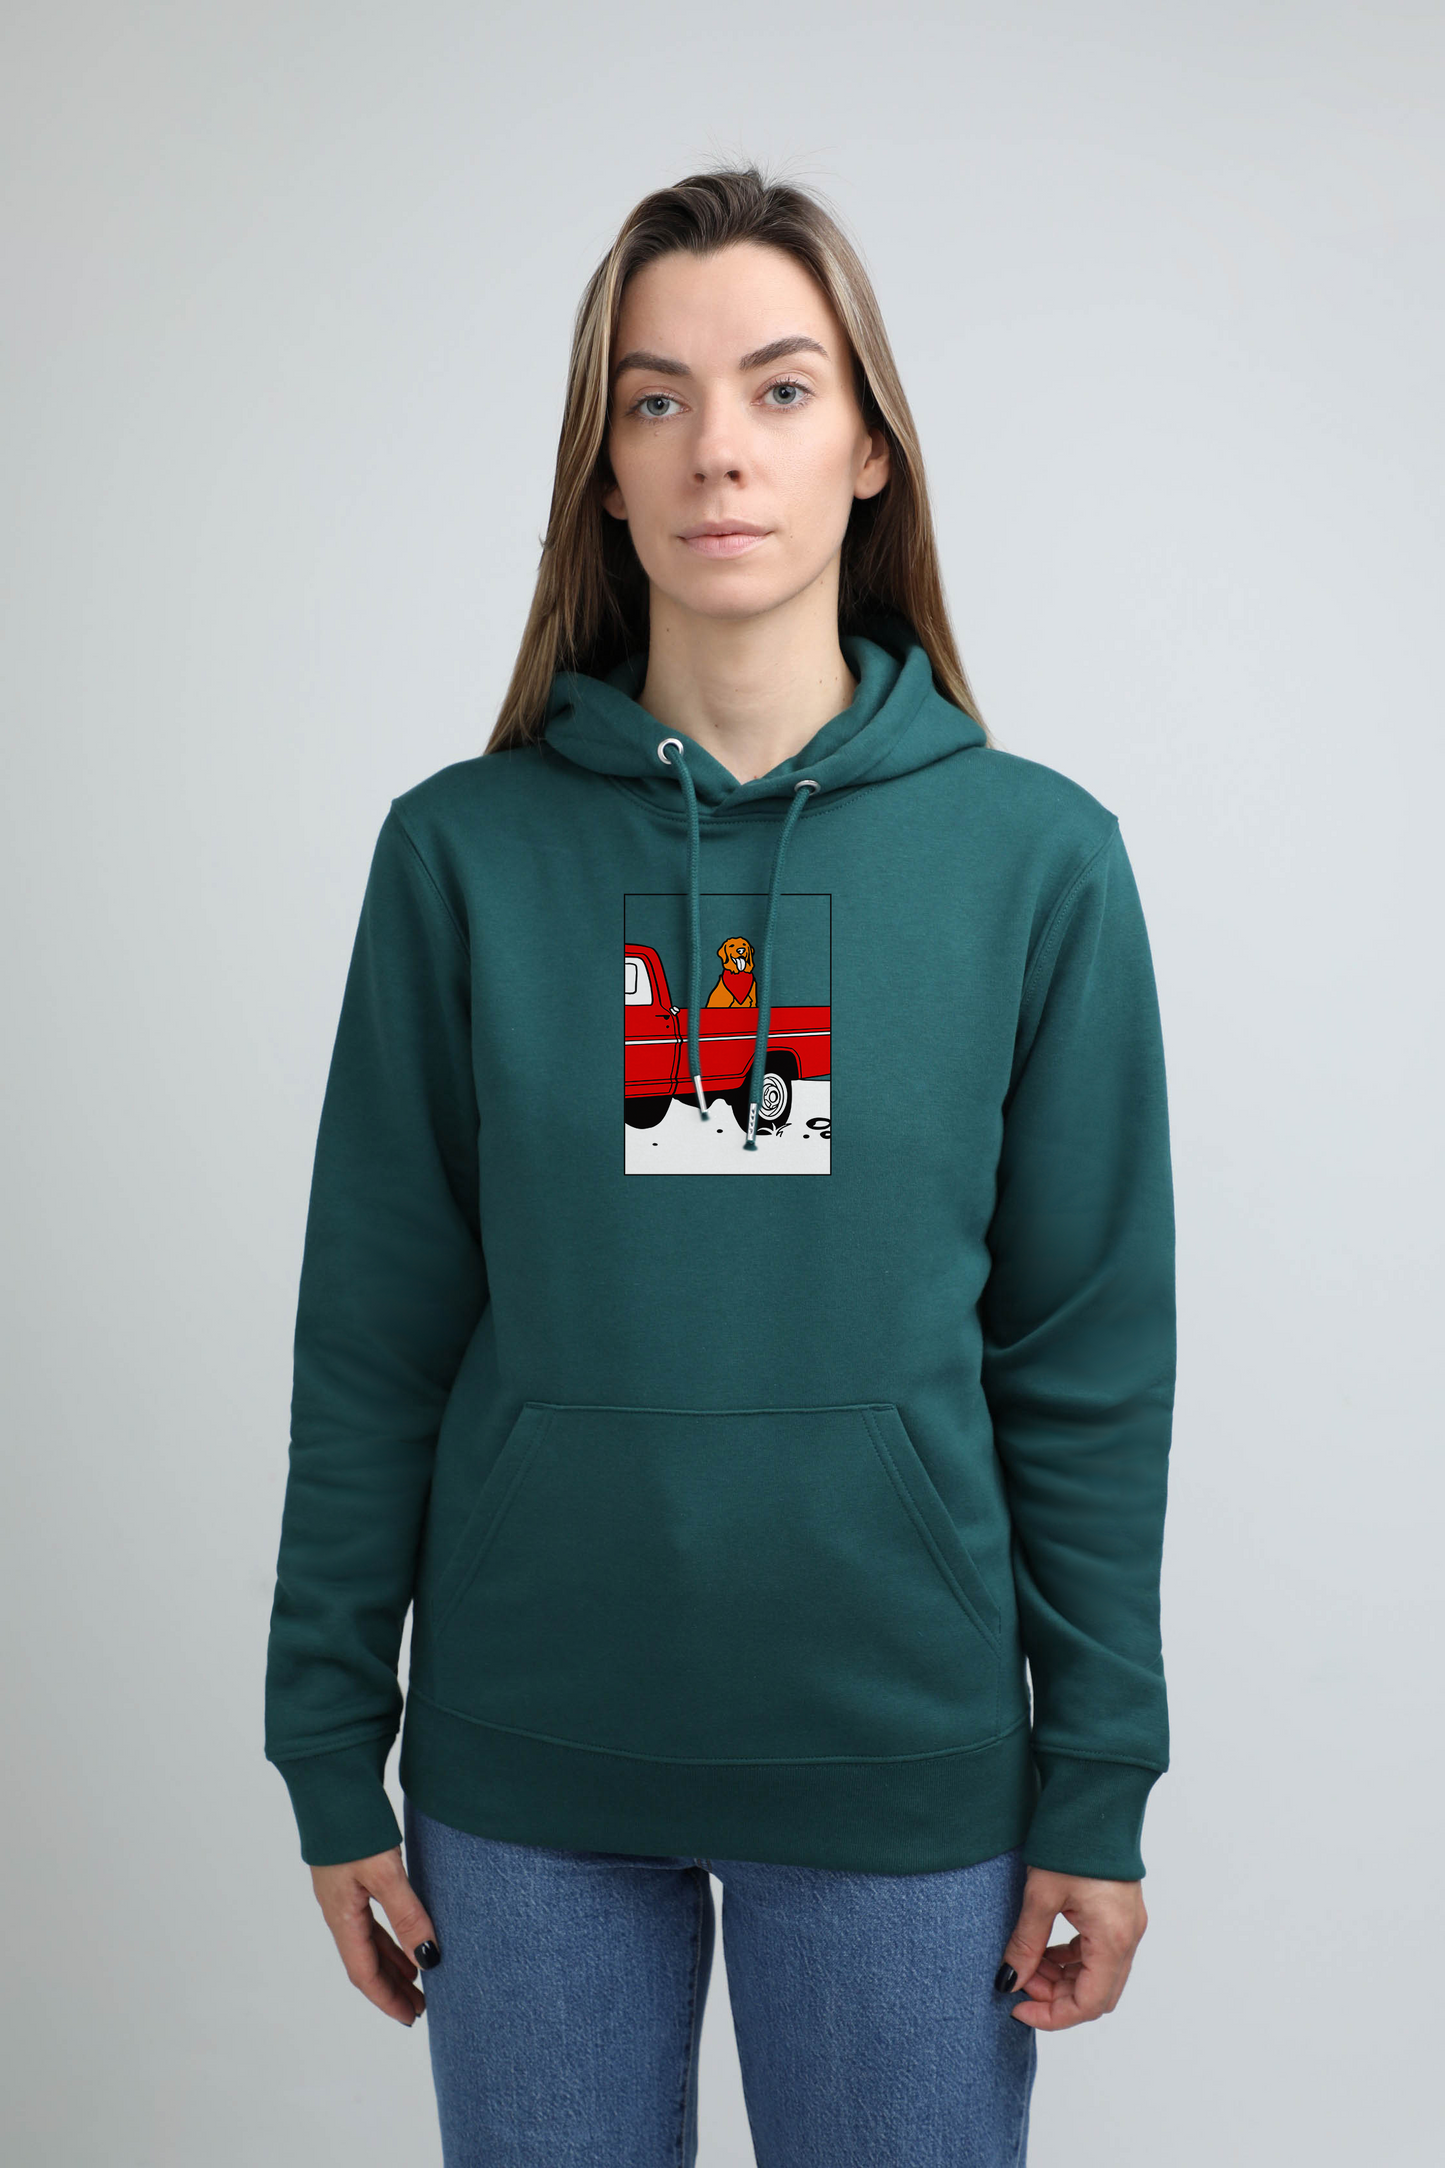 Pickup truck dog | Hoodie with dog. Regular fit | Unisex by My Wild Other